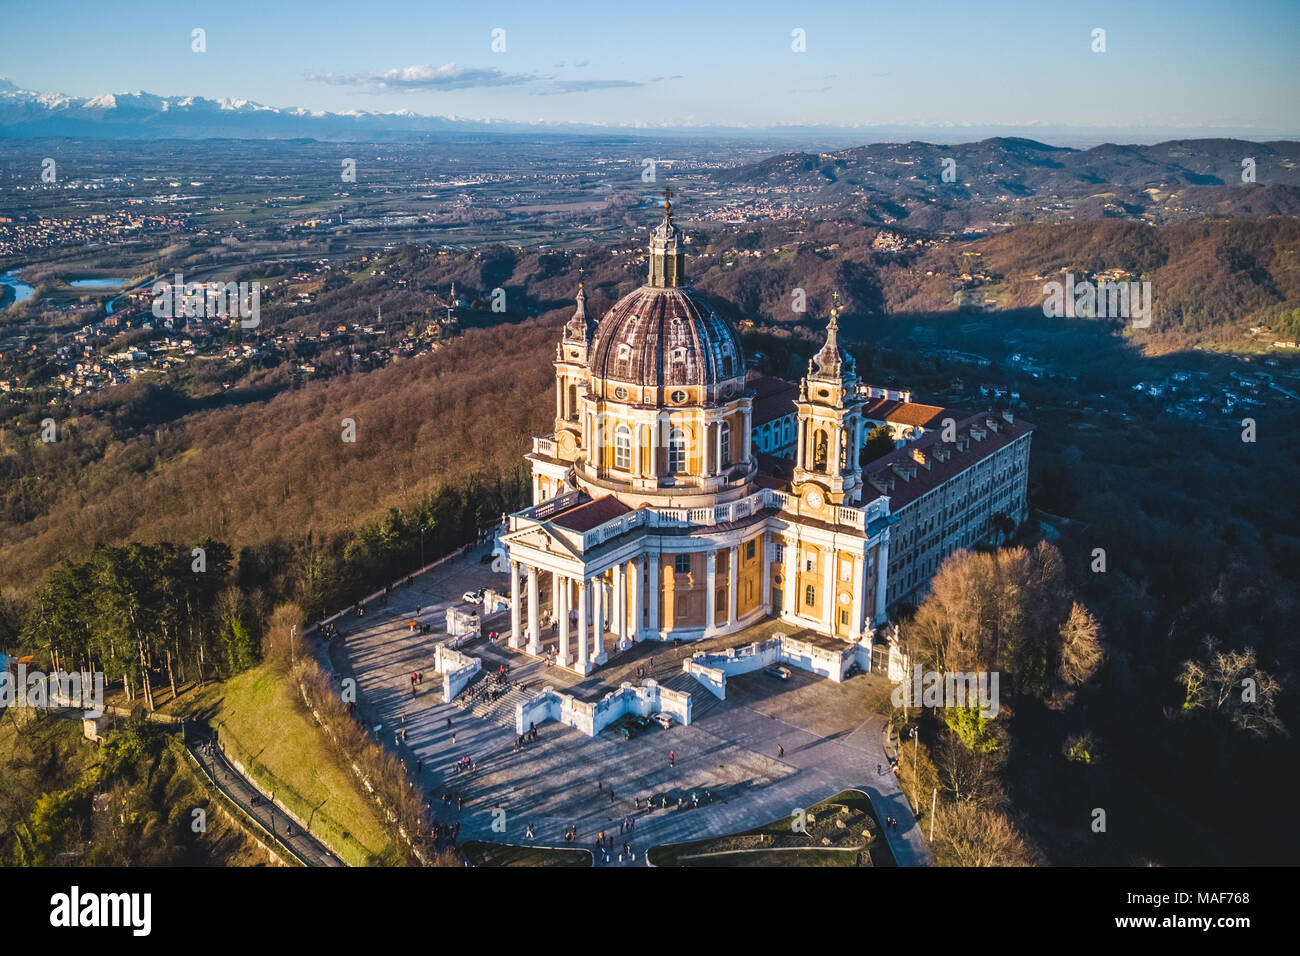 Aerial pictures of the Basilica di Superga.The Basilica of Superga is a church in the vicinity of Turin. Photo: Alessandro Bosio/Alamy Stock Photo